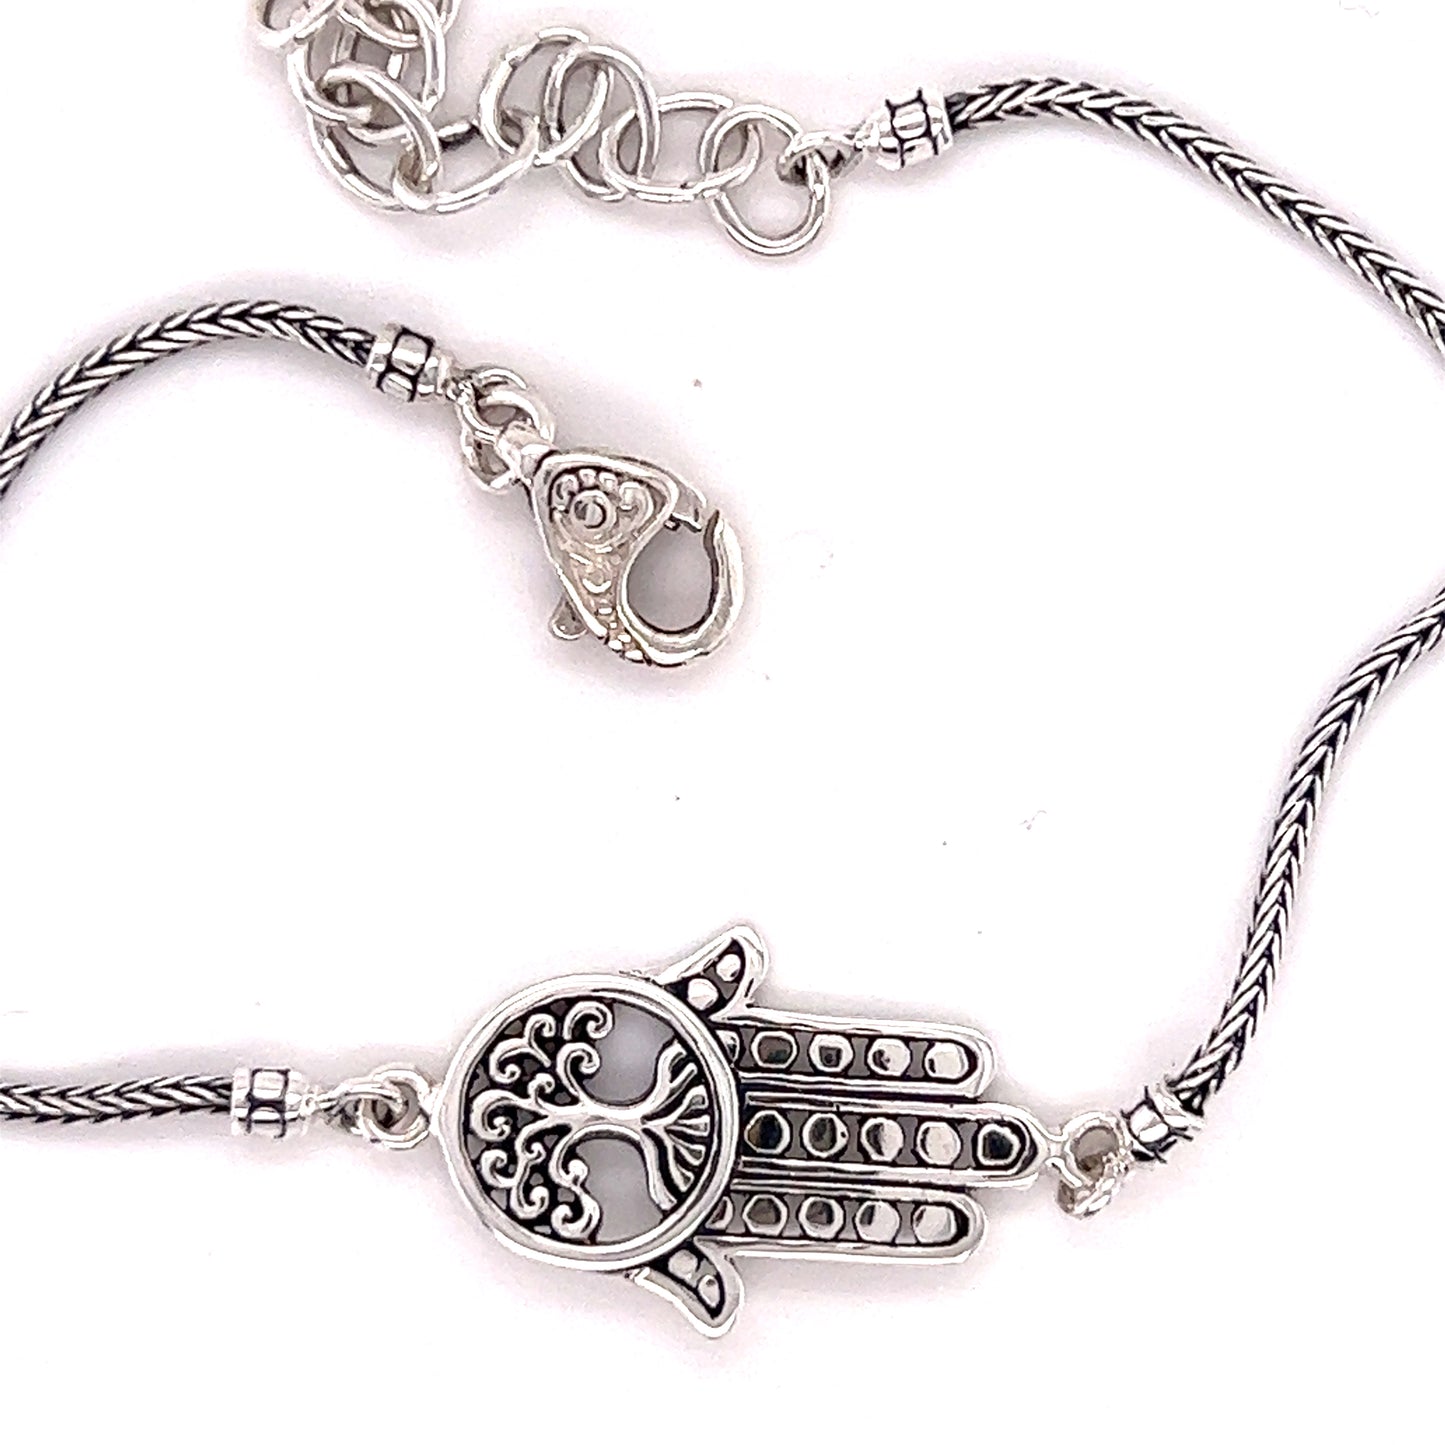 An everyday wear Hamsa with Tree of Life Bracelet from Super Silver, showcased on a clean white background.